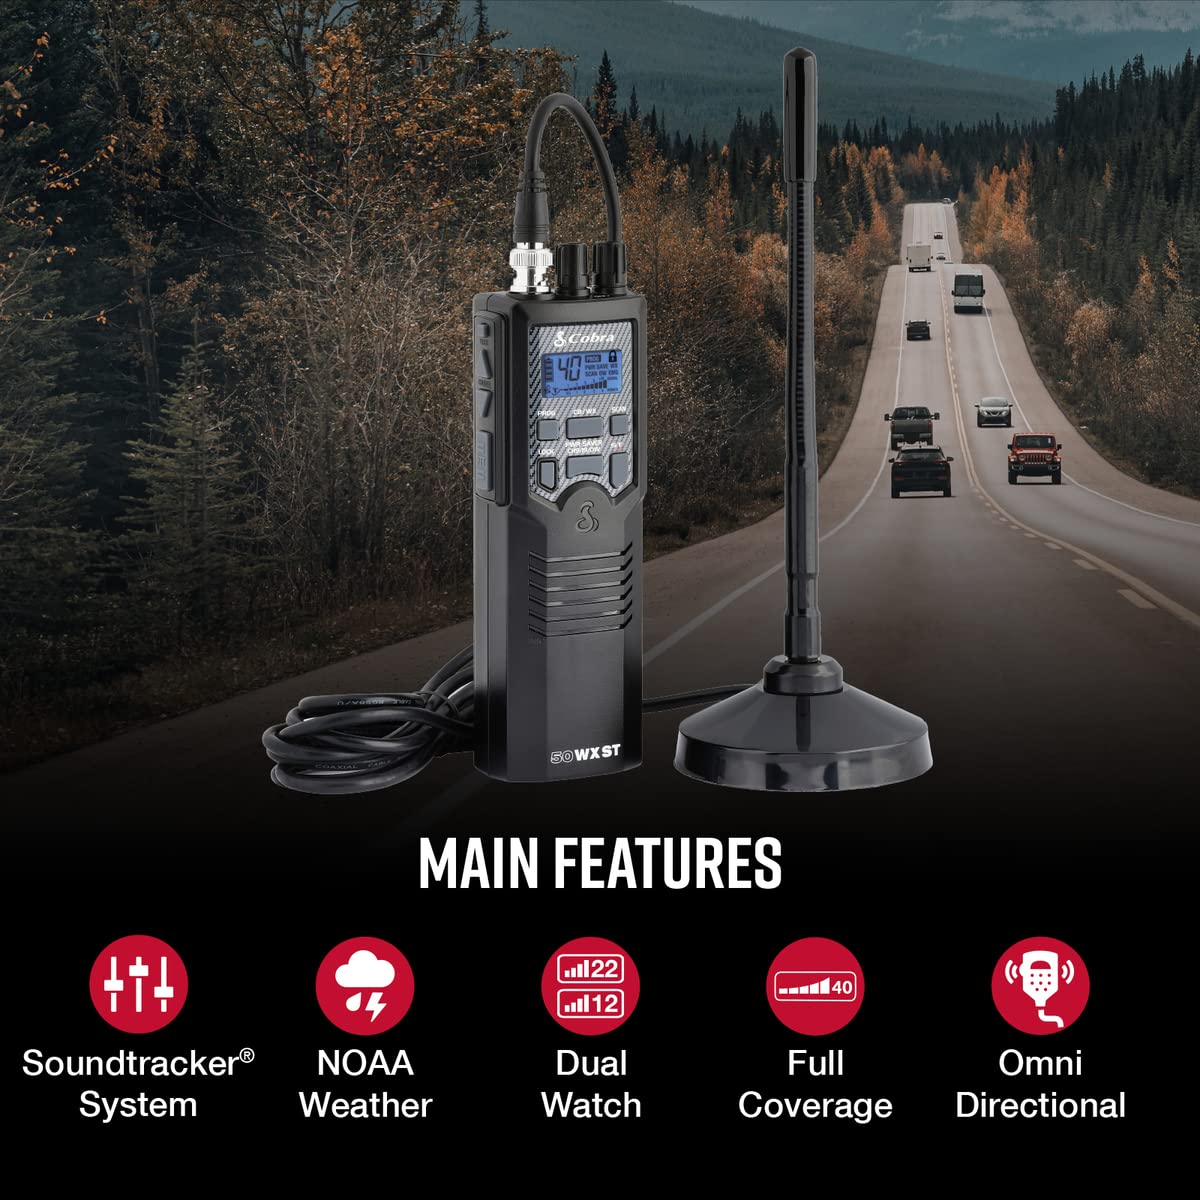 Cobra CB Radios - Reliable 2-Way Communication While Driving with Emergency Channel Access and Weather Alerts